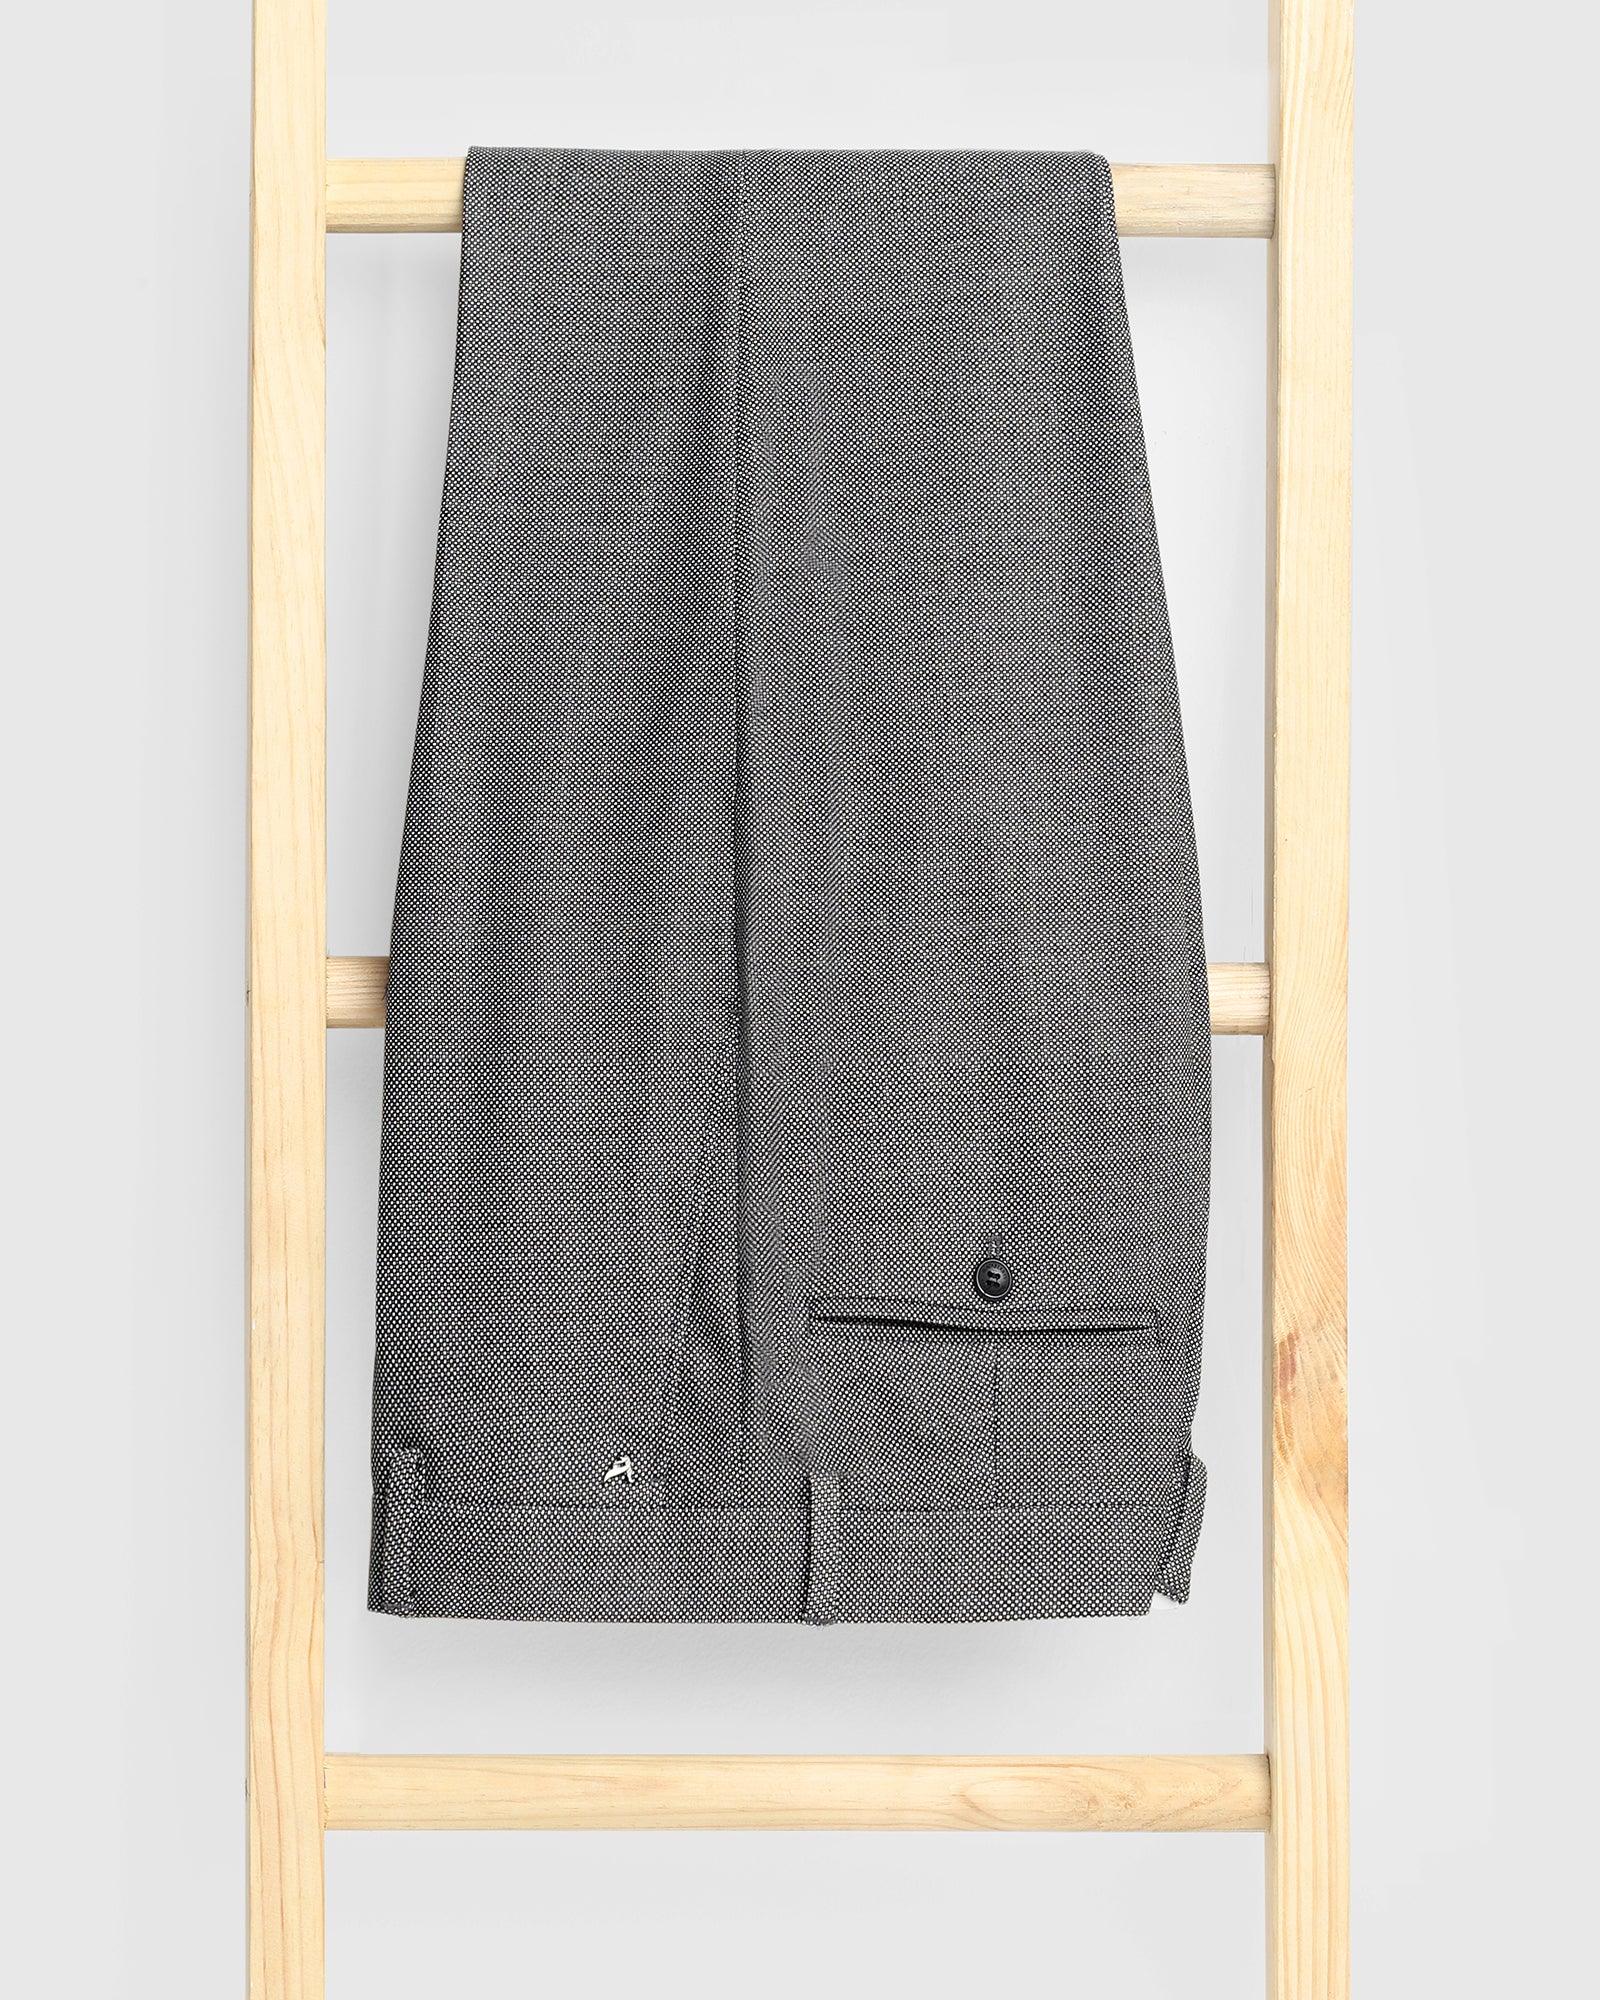 Straight B-90 Formal Grey Textured Trouser - Beck